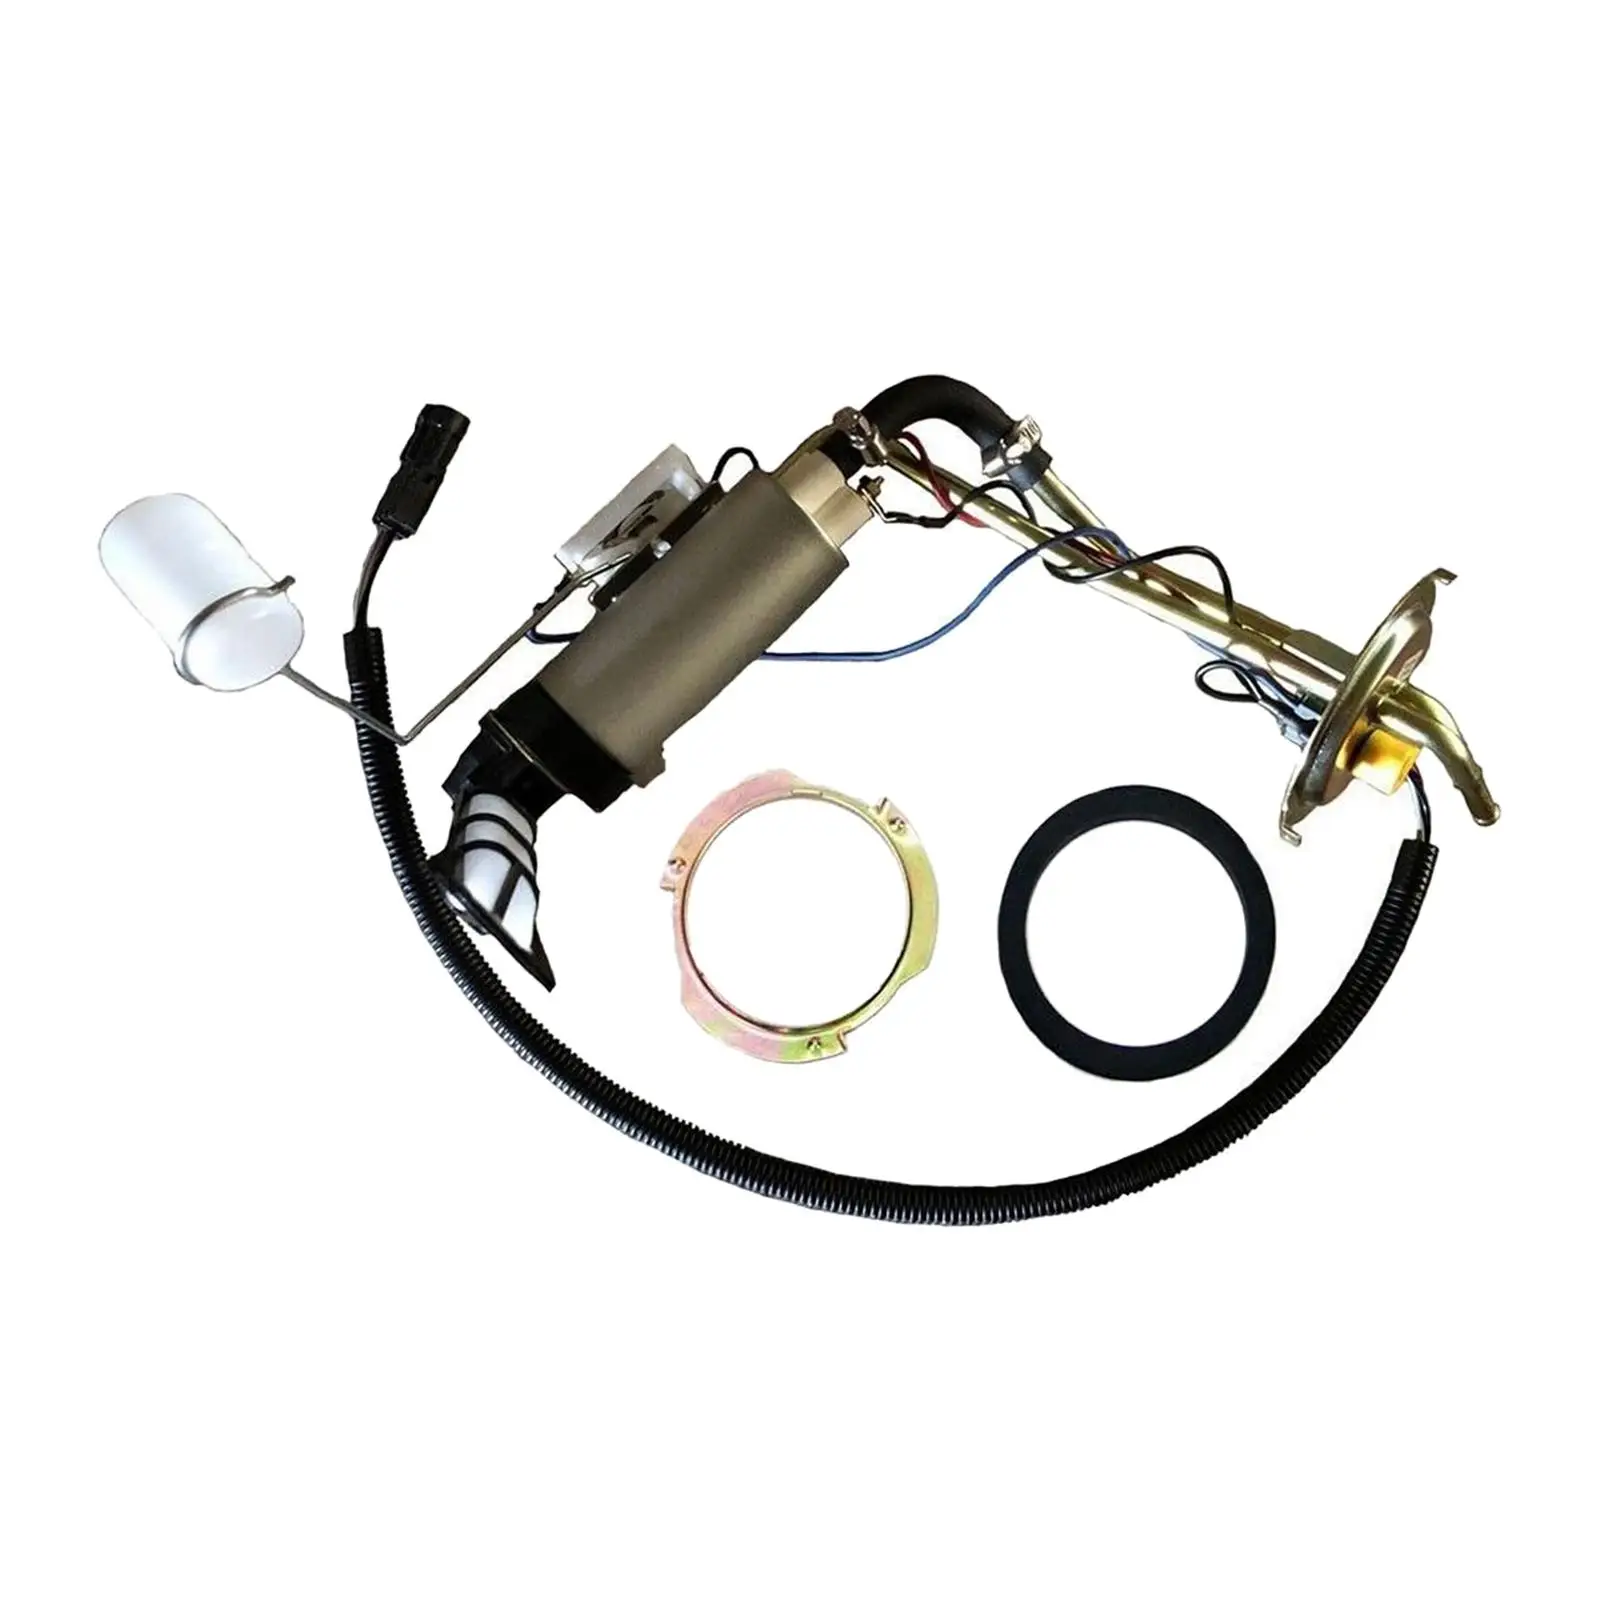 Gas Tank Sending Unit Directly Replace with Fuel Pump for Jeep Comanche MJ Easy Installation Durable Automotive Accessories